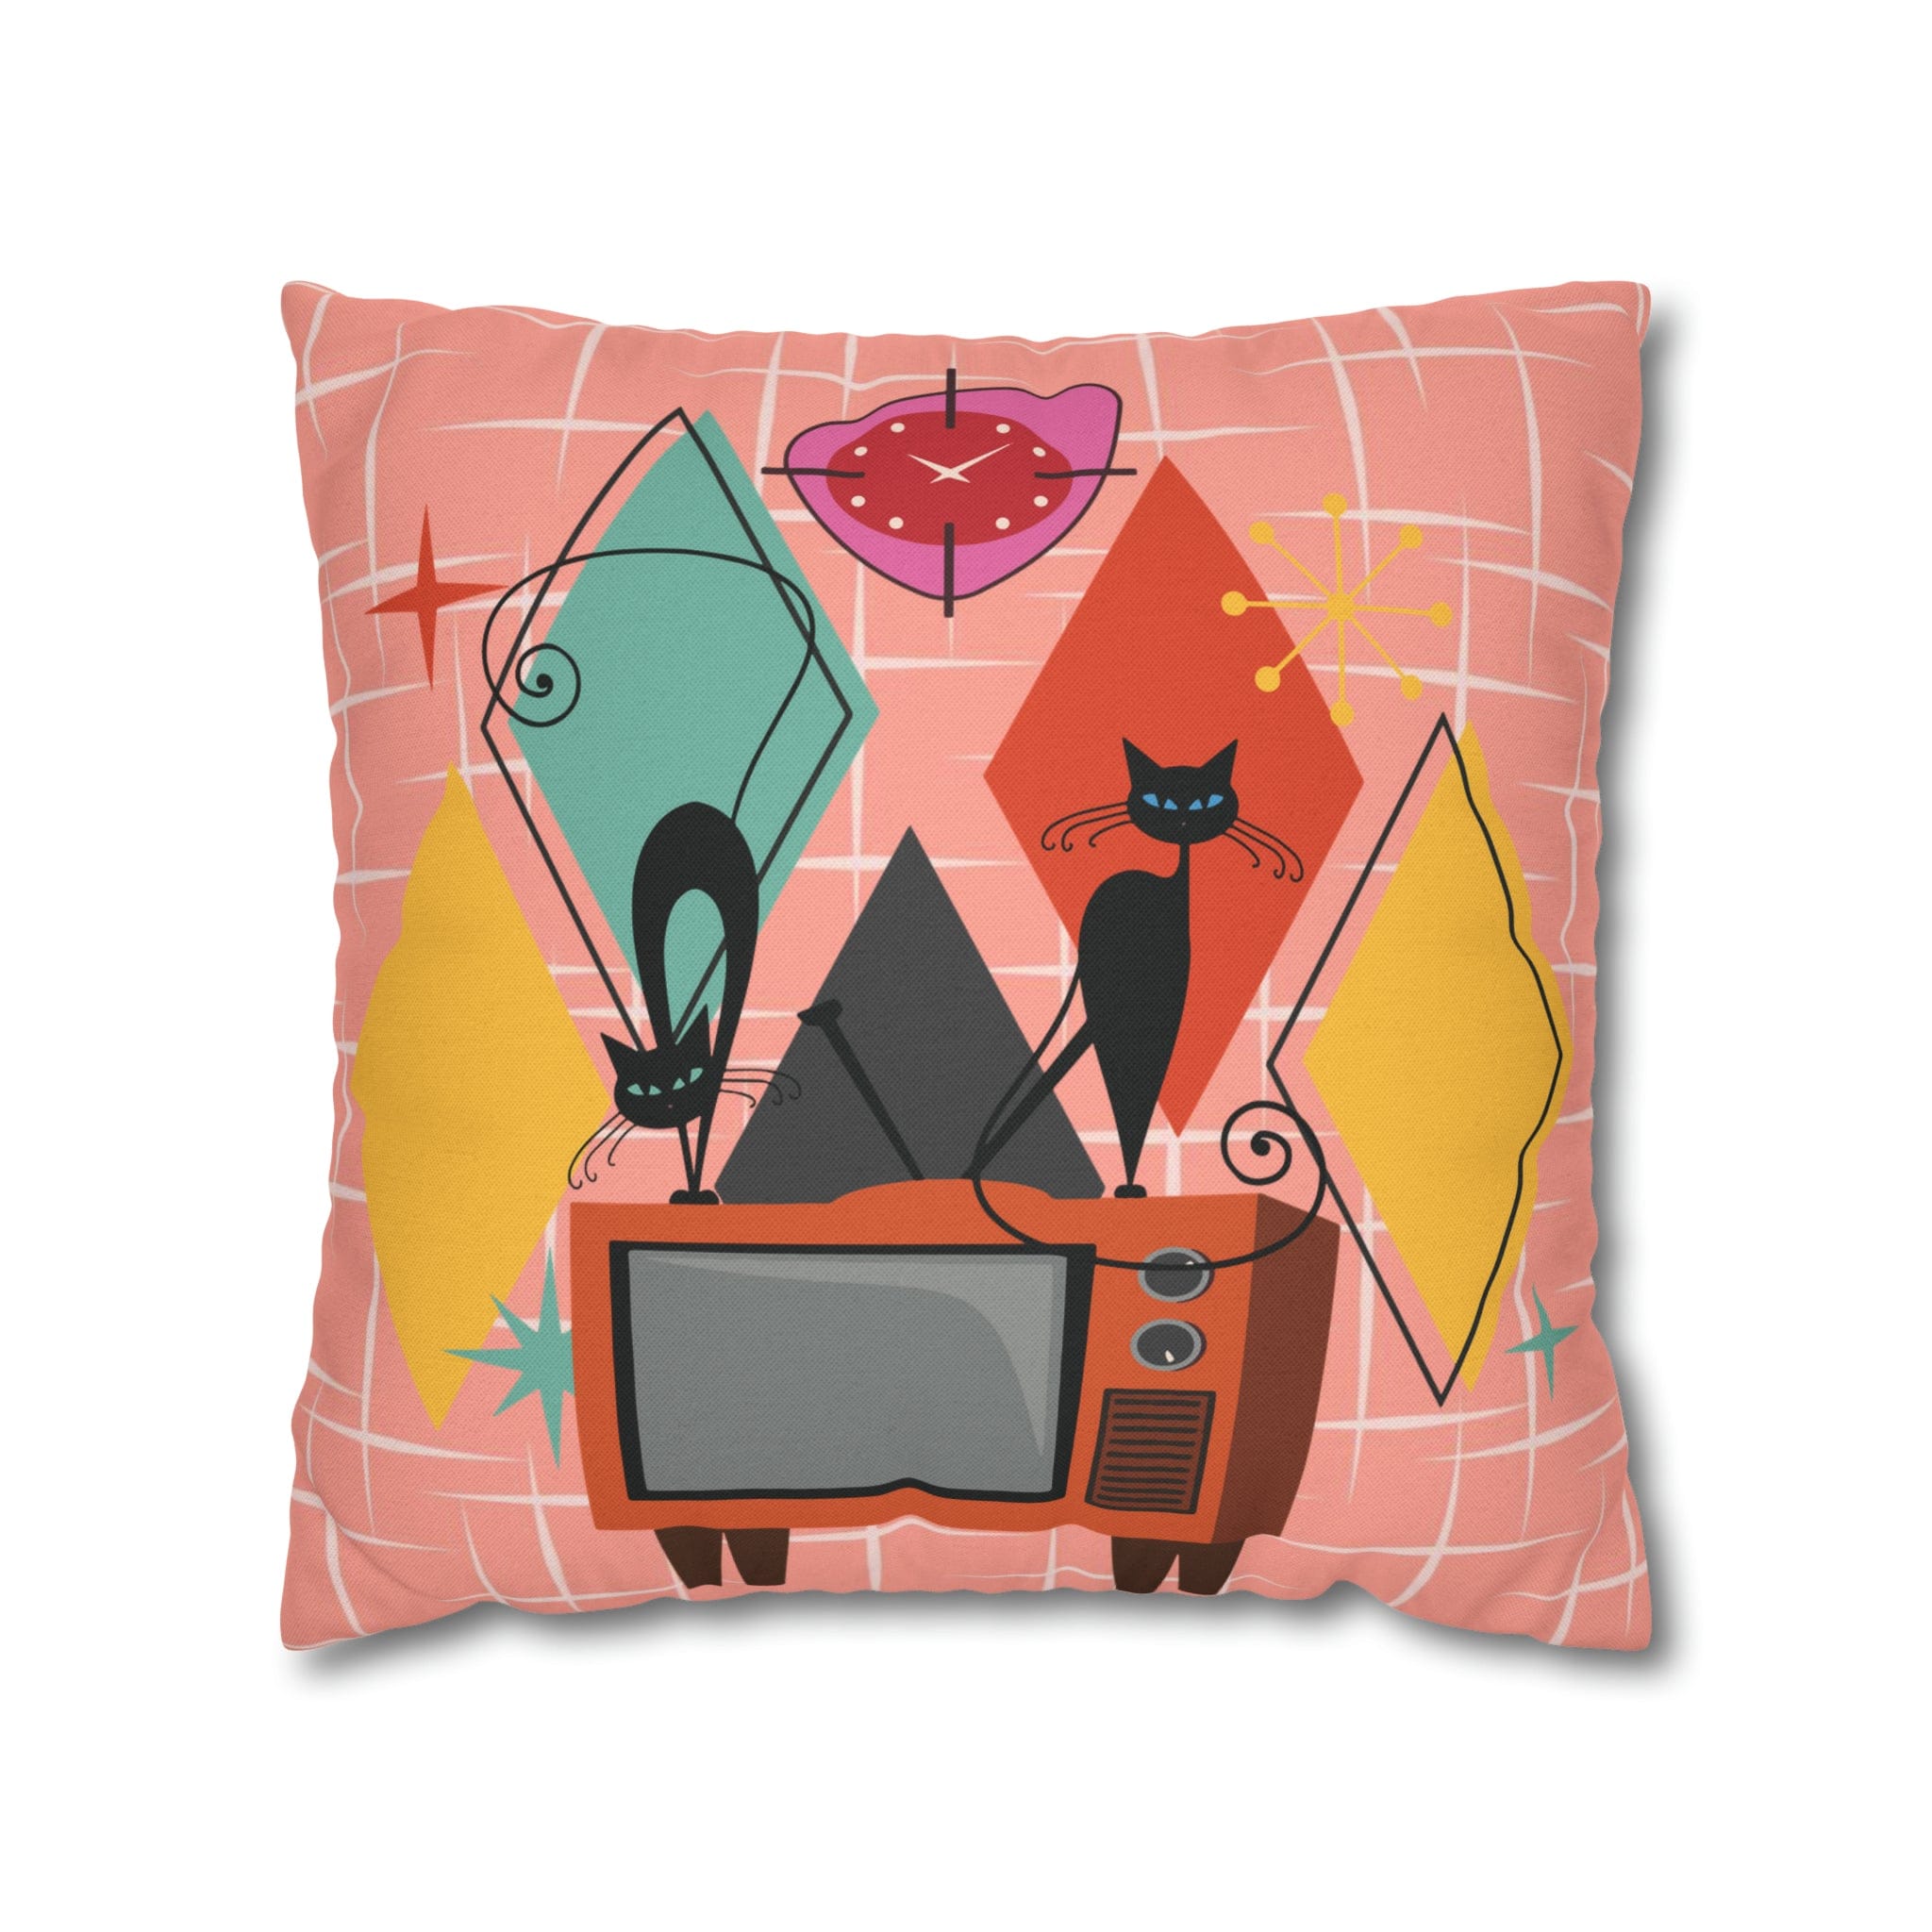 Kate McEnroe New York Atomic Cat Retro TV Pillow Cover, Mid Century Modern Orange, Teal, Yellow, Pink Cushion Covers, MCM Pillow CaseThrow Pillow Covers28026697588794533196